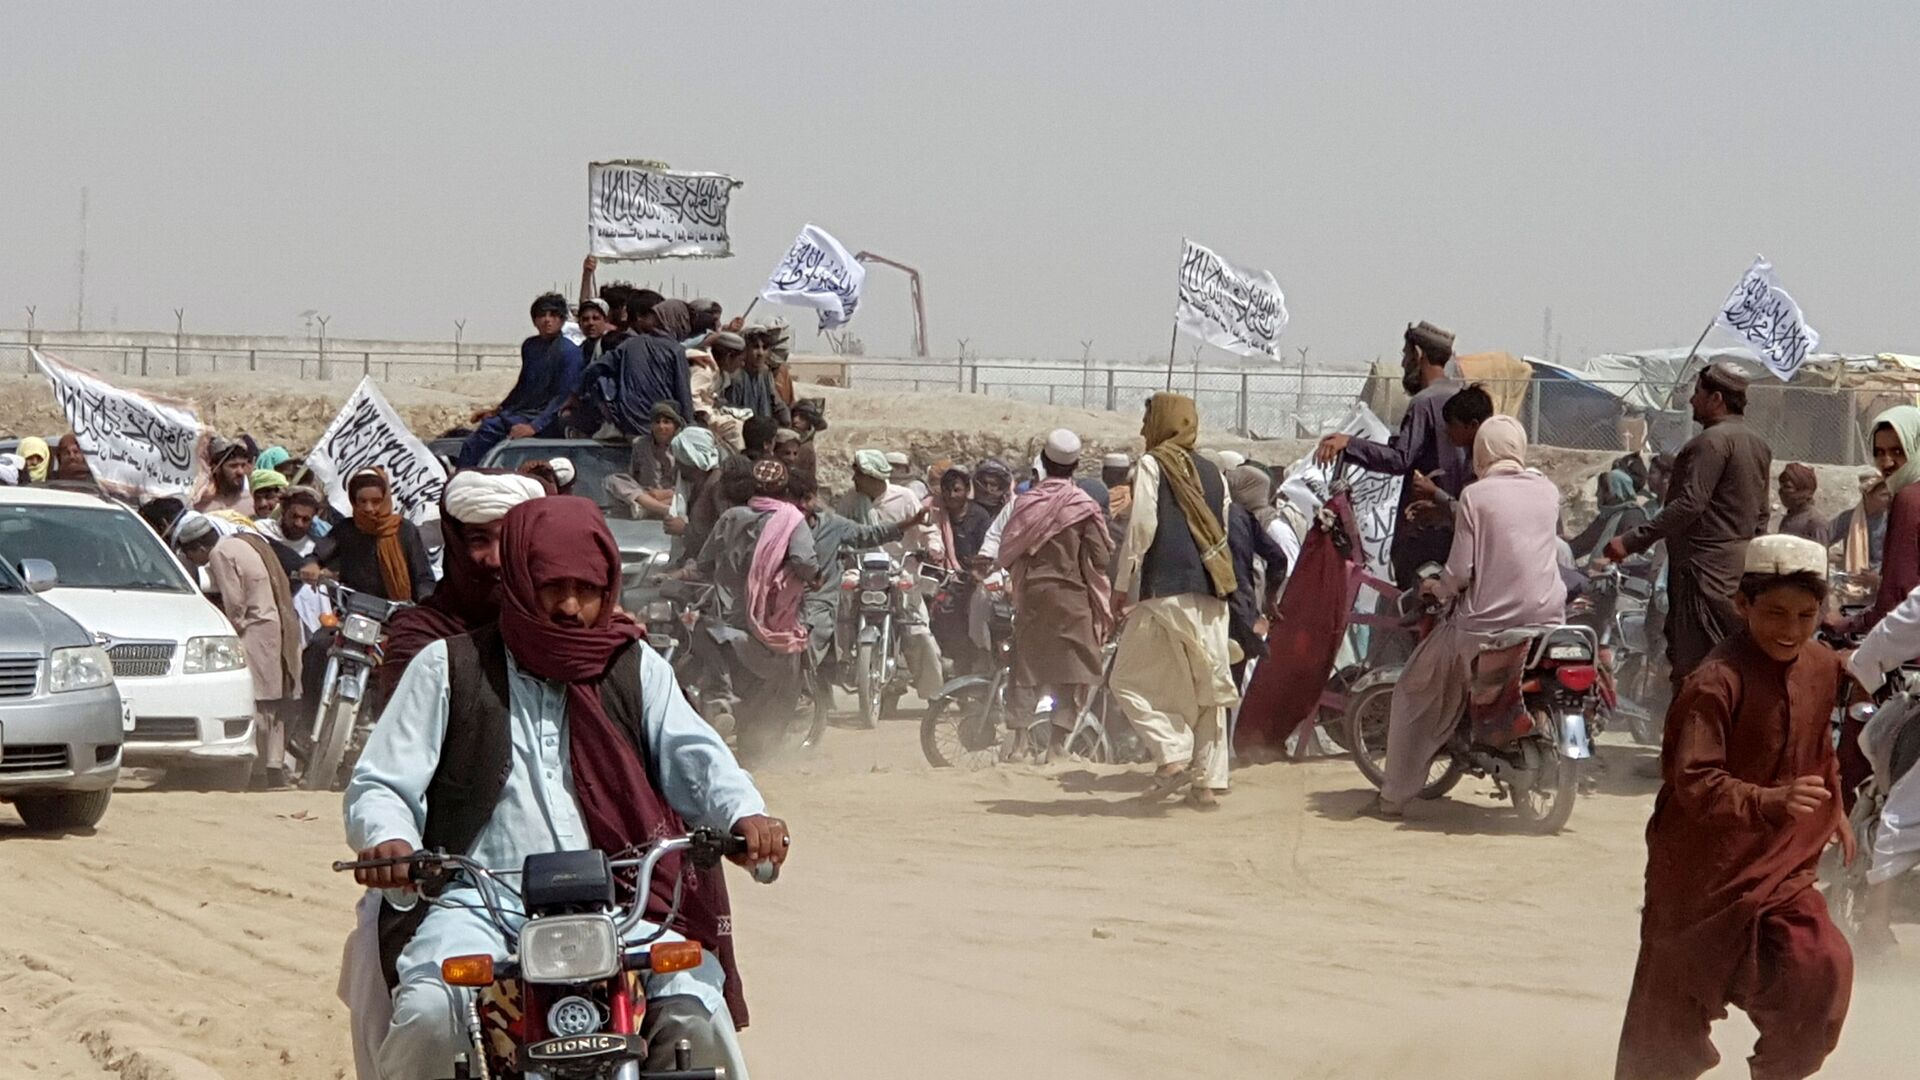 People on vehicles, holding Taliban flags, gather near the Friendship Gate crossing point in the Pakistan-Afghanistan border town of Chaman, Pakistan July 14, 2021 - Sputnik International, 1920, 17.07.2021